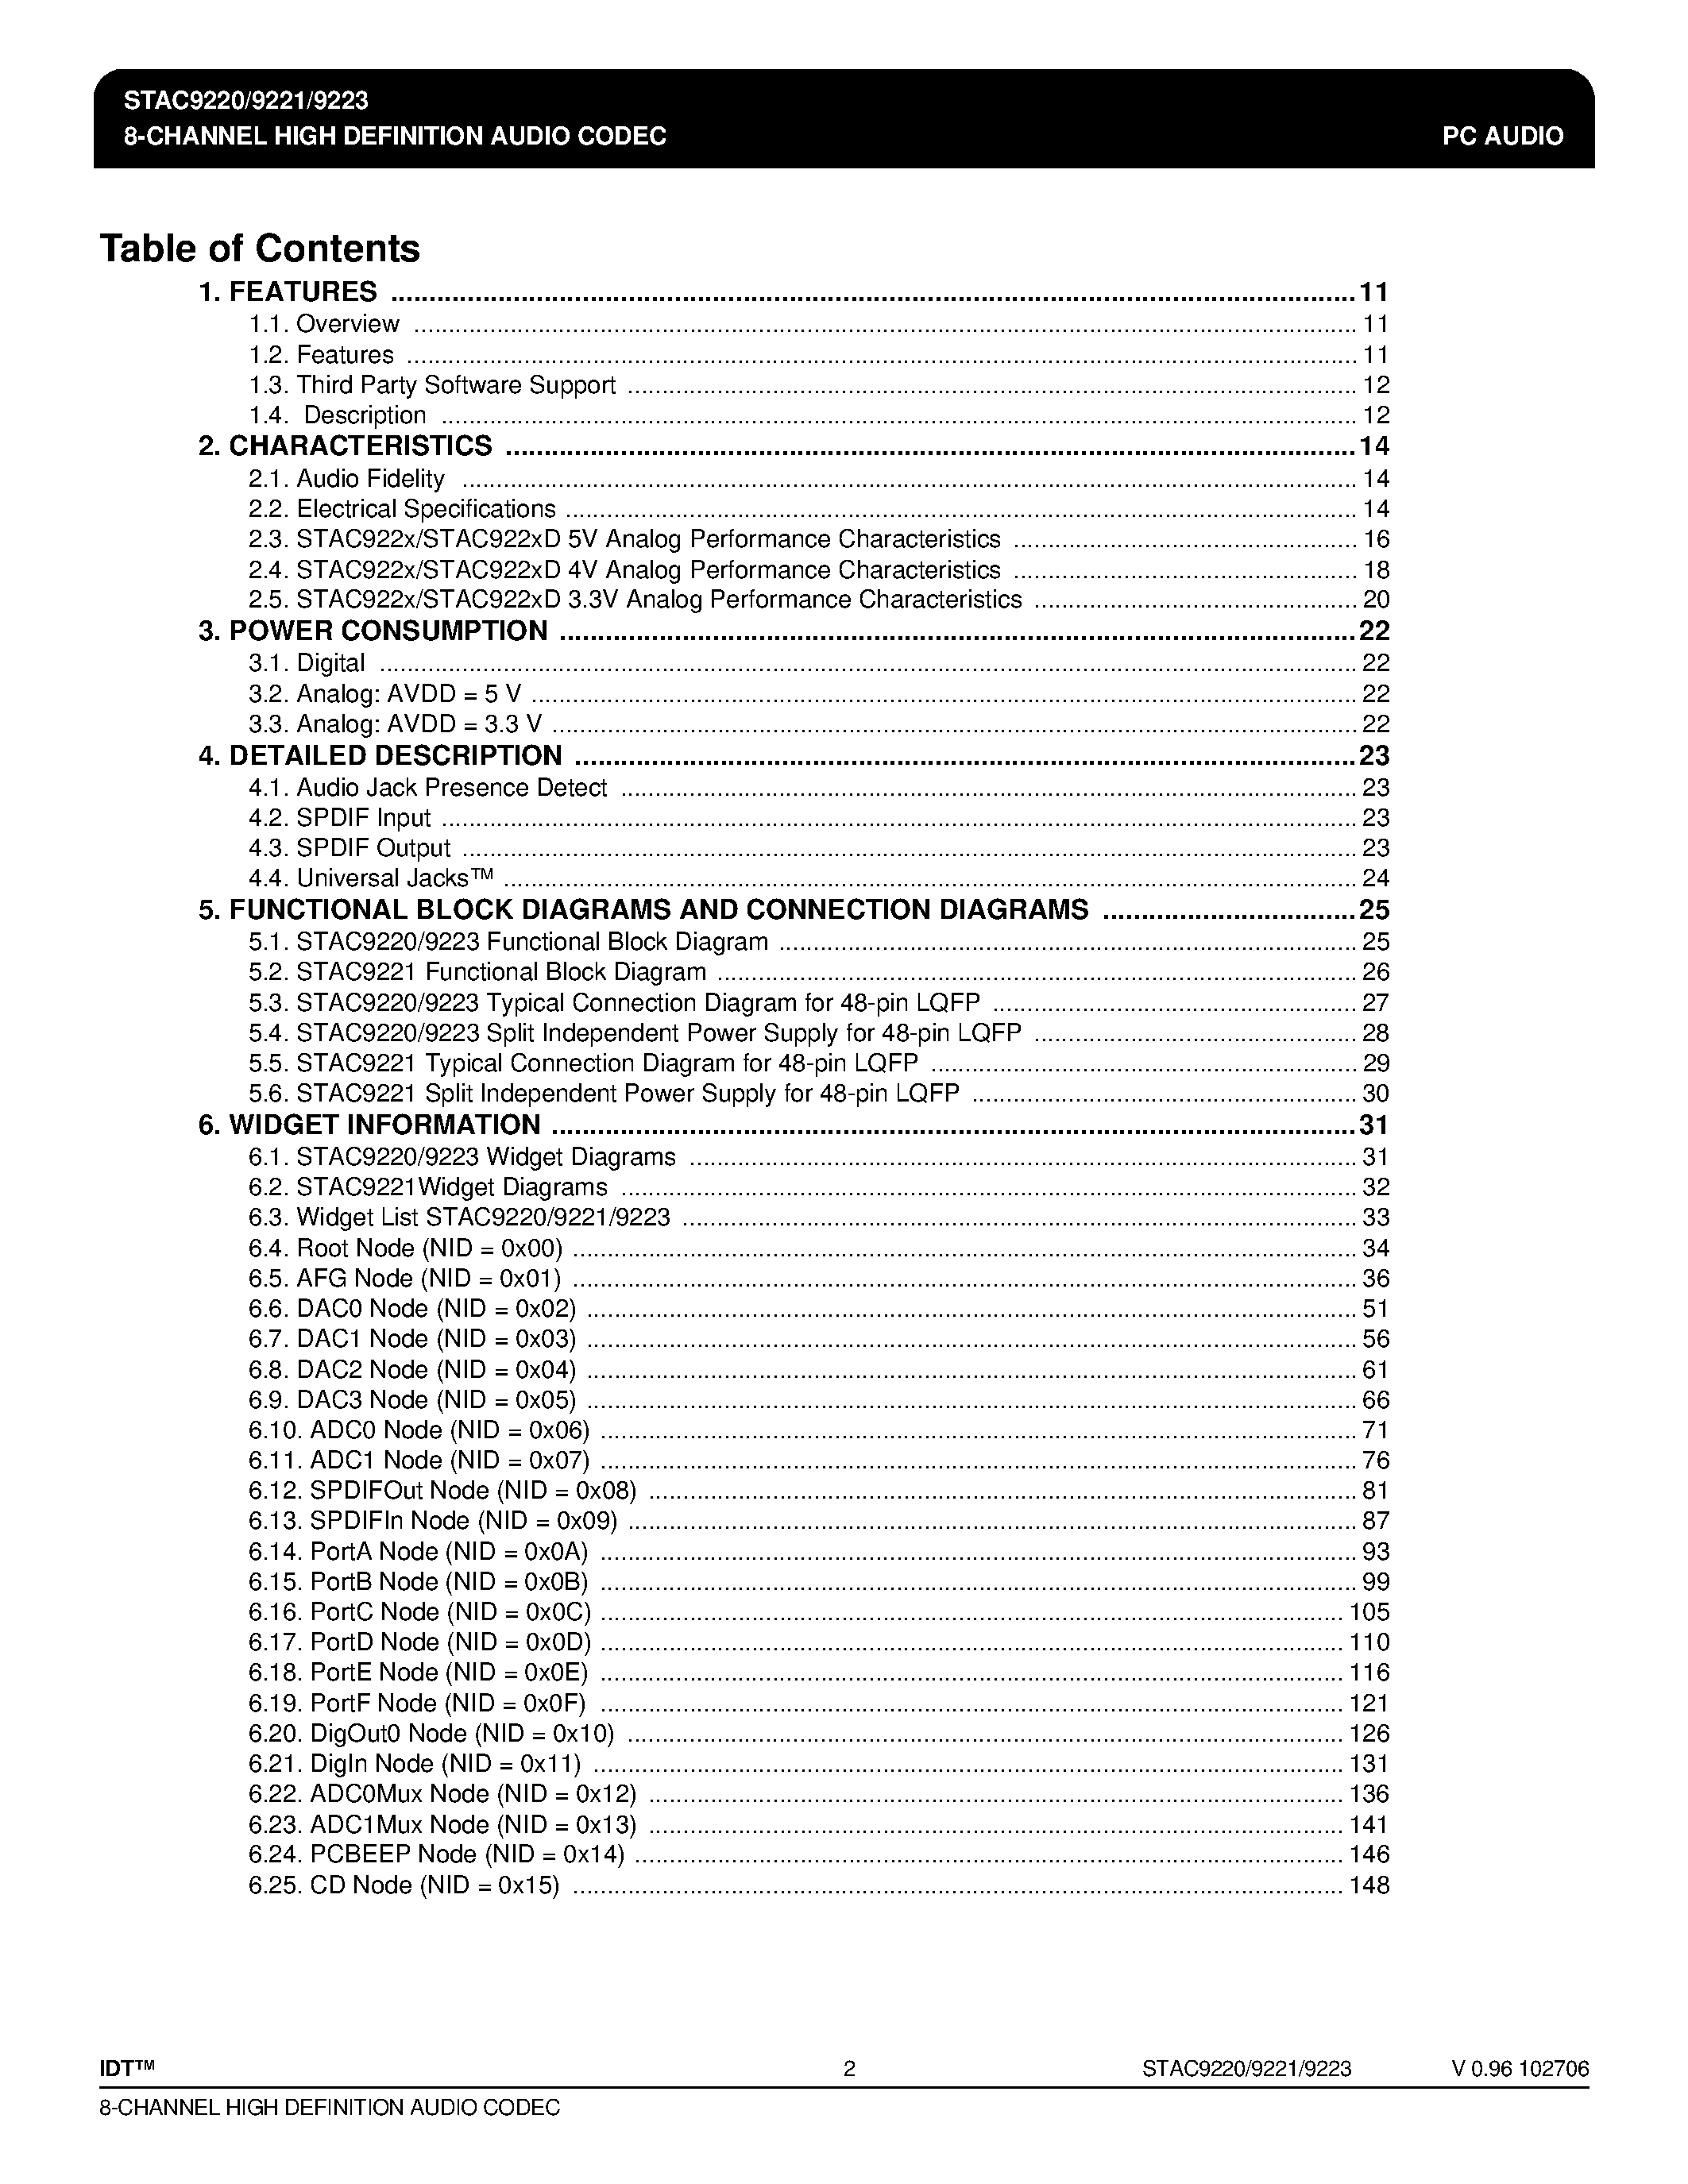 Datasheet STAC9220 - (STAC9220 - STAC9223) 8-CHANNEL HIGH DEFINITION AUDIO CODEC page 2